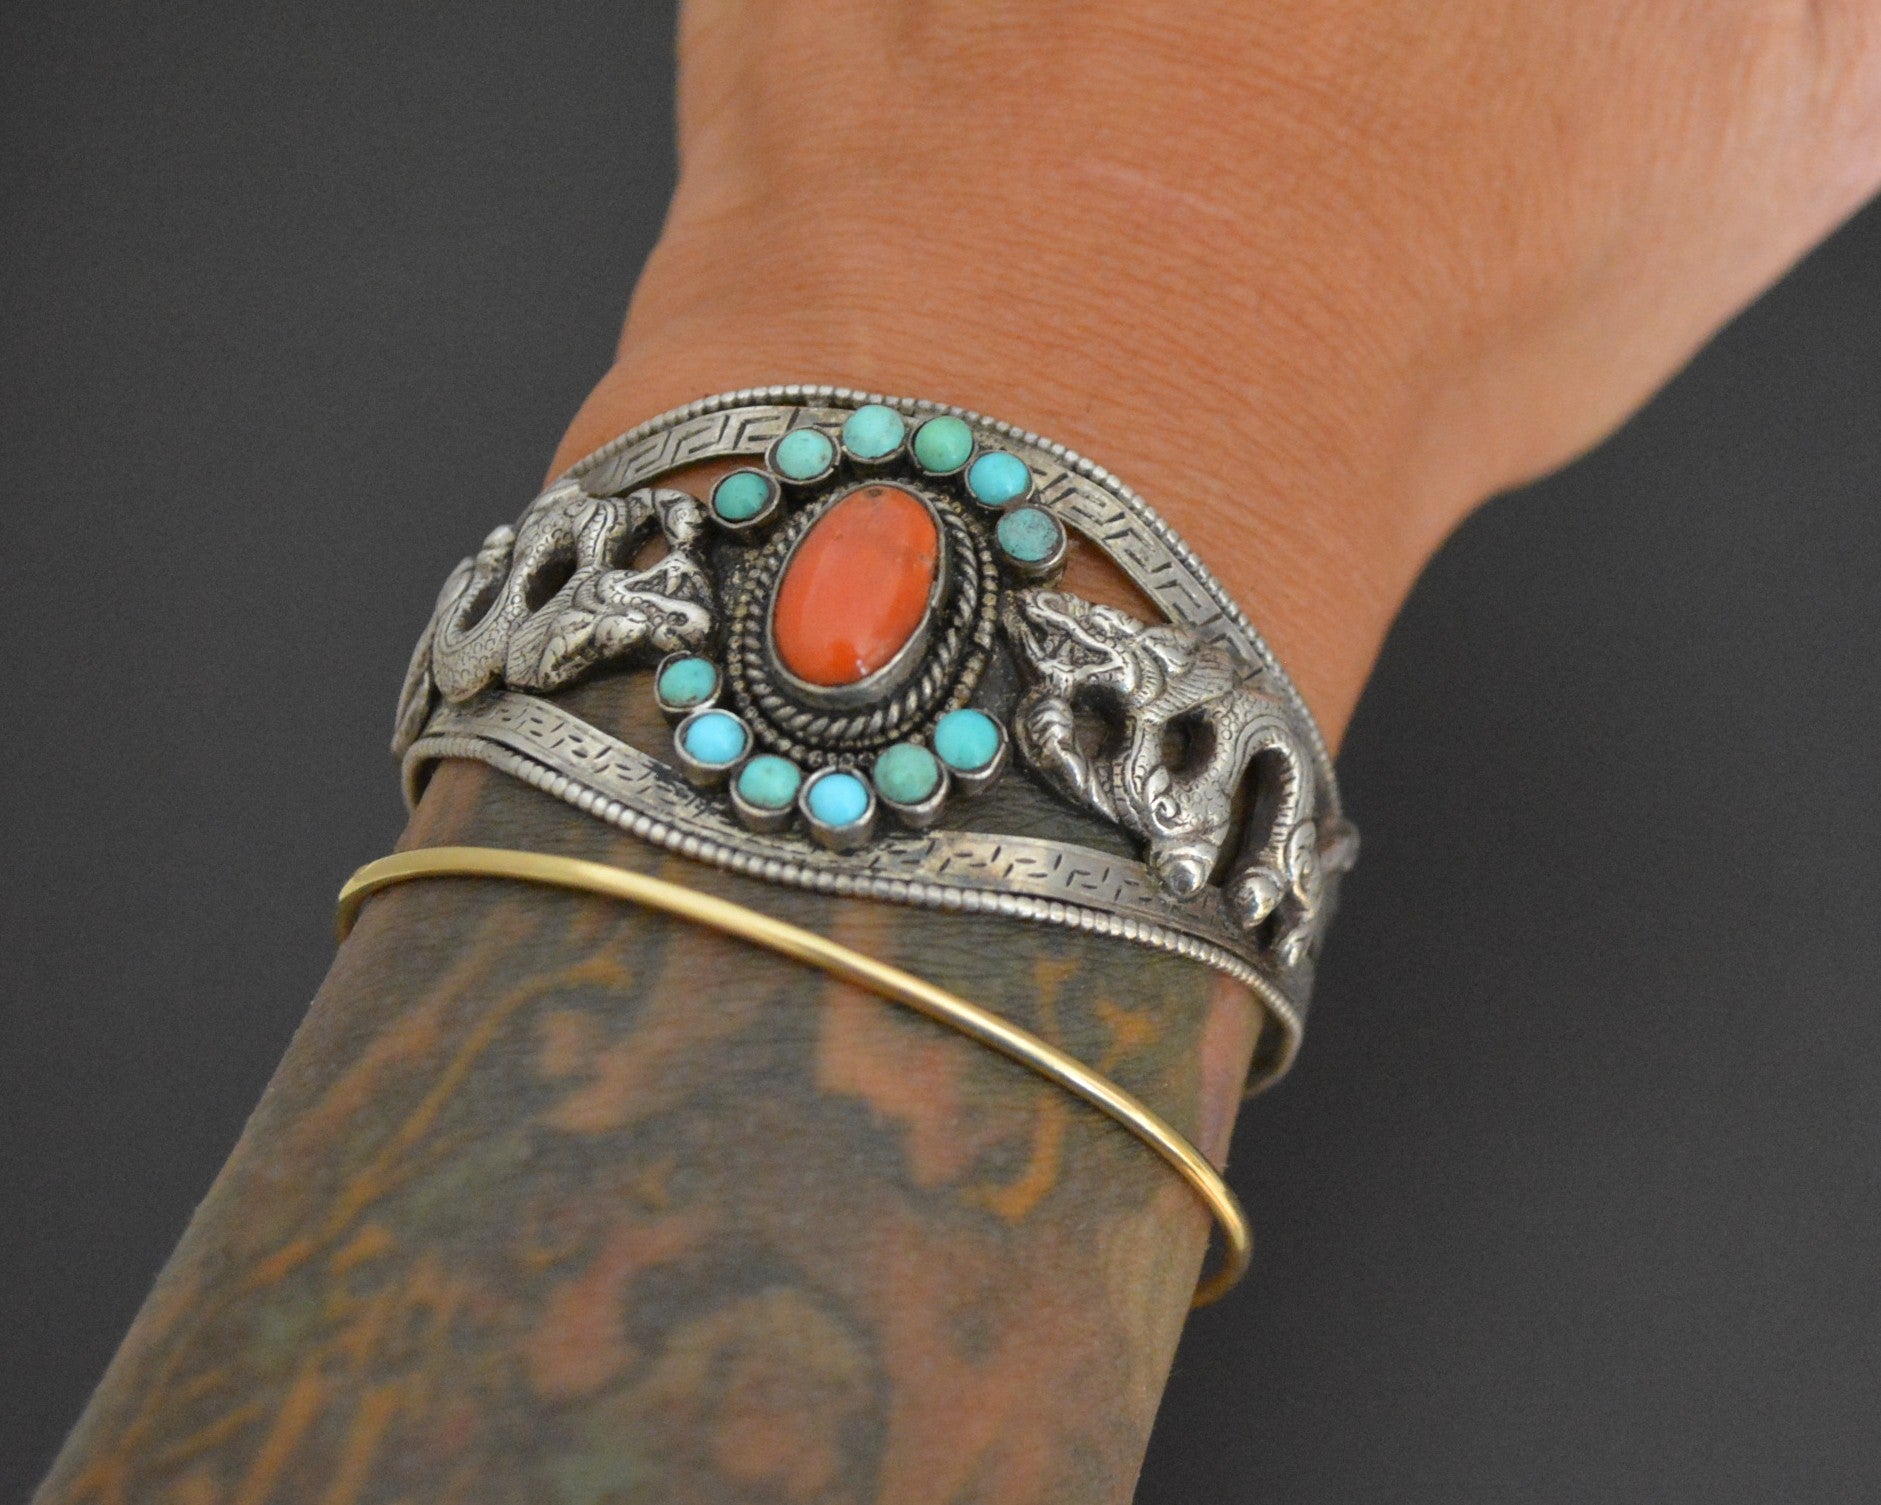 TIBETAN NEPALESE BRACELETS  NEPALESE TURQUOISE CORAL AND BRASS BEAD  AGATE AND TURQUOISE BRACELET